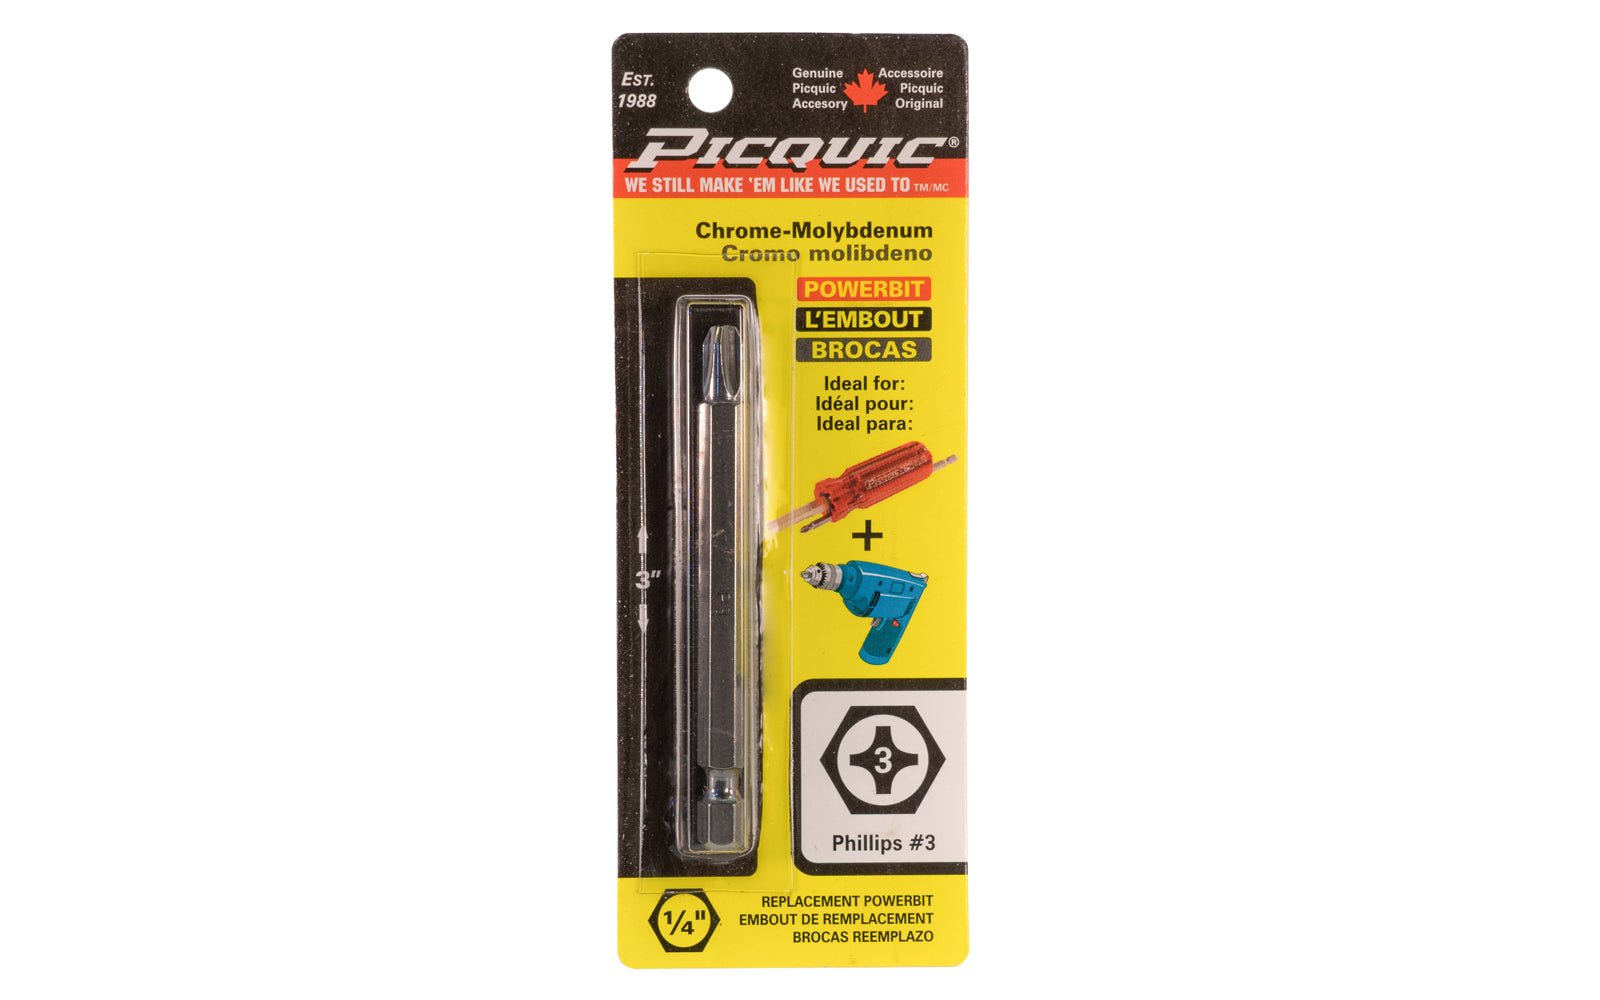 Picquic 3" length powerbit - #3 Phillips. 1/4" hex shank power bits ideal for use in drills & impact drivers. Model 88023.